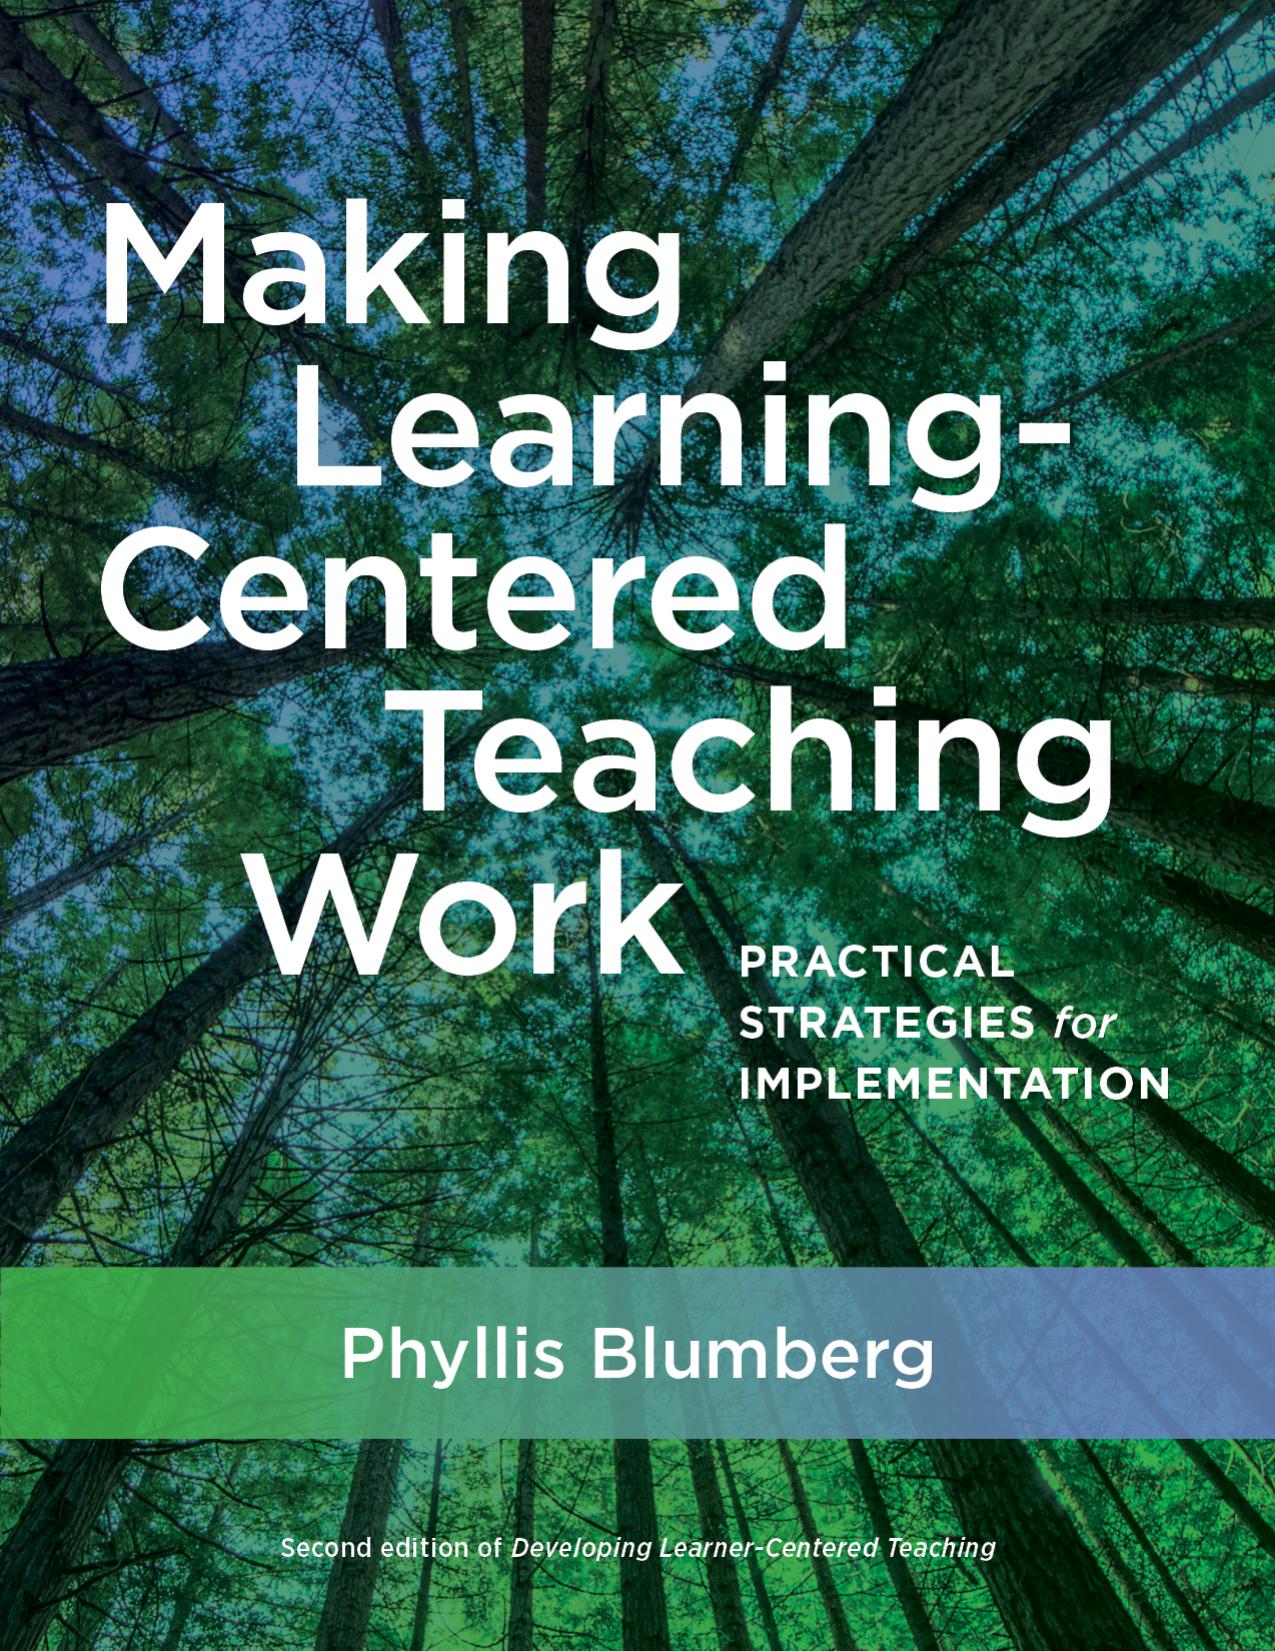 Making Learning-Centered Teaching Work: Practical Strategies for Implementation by Phyllis Blumberg